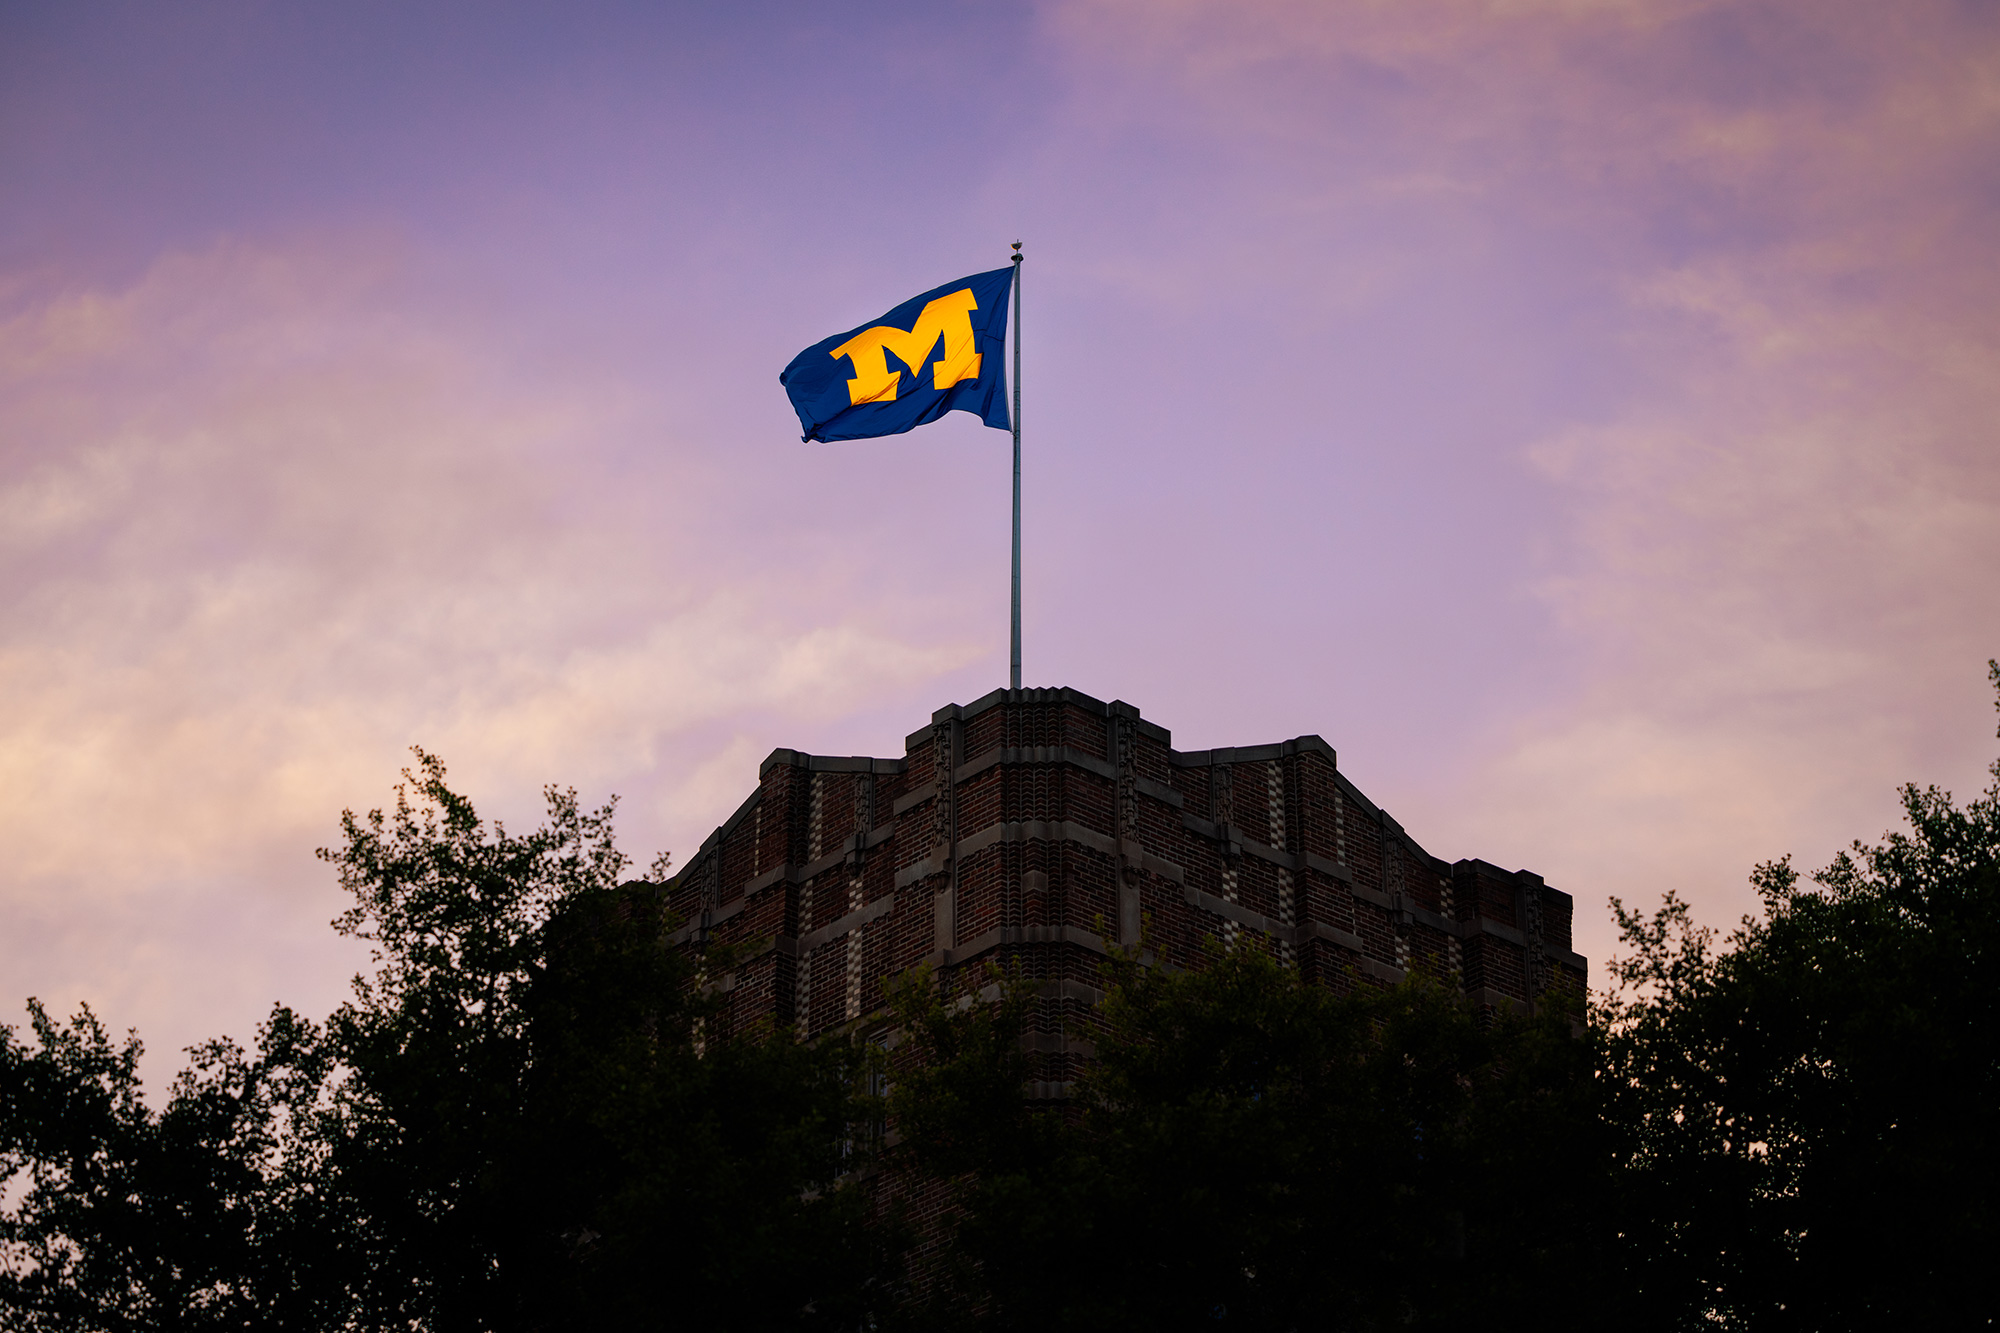 Block M flag flying over the Michigan Union at sunset.